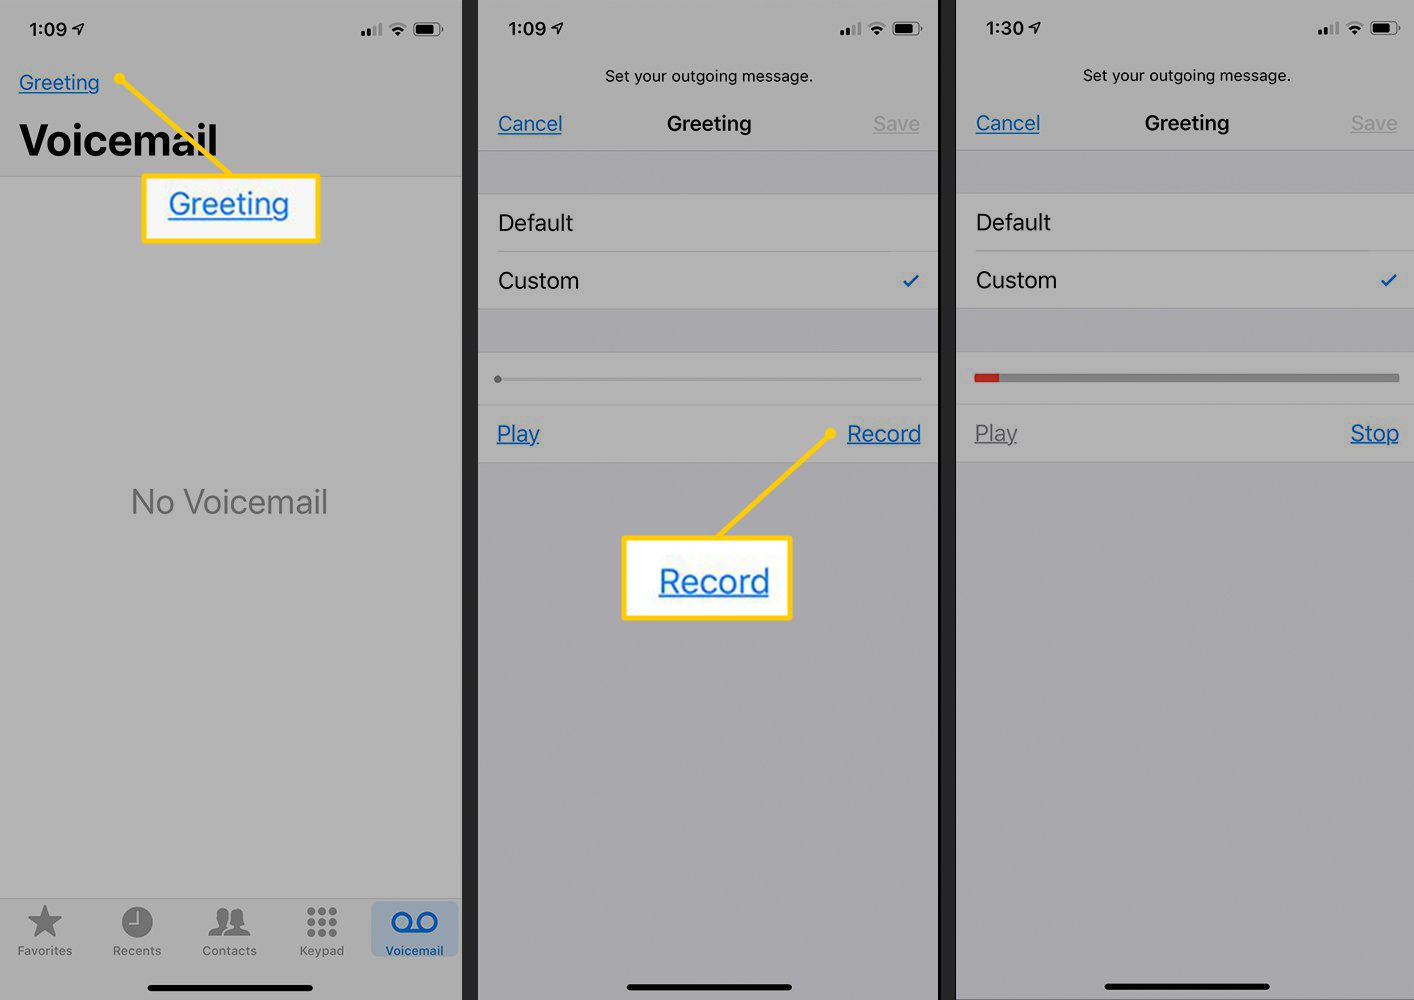 How To Set up Voicemail in iPhone